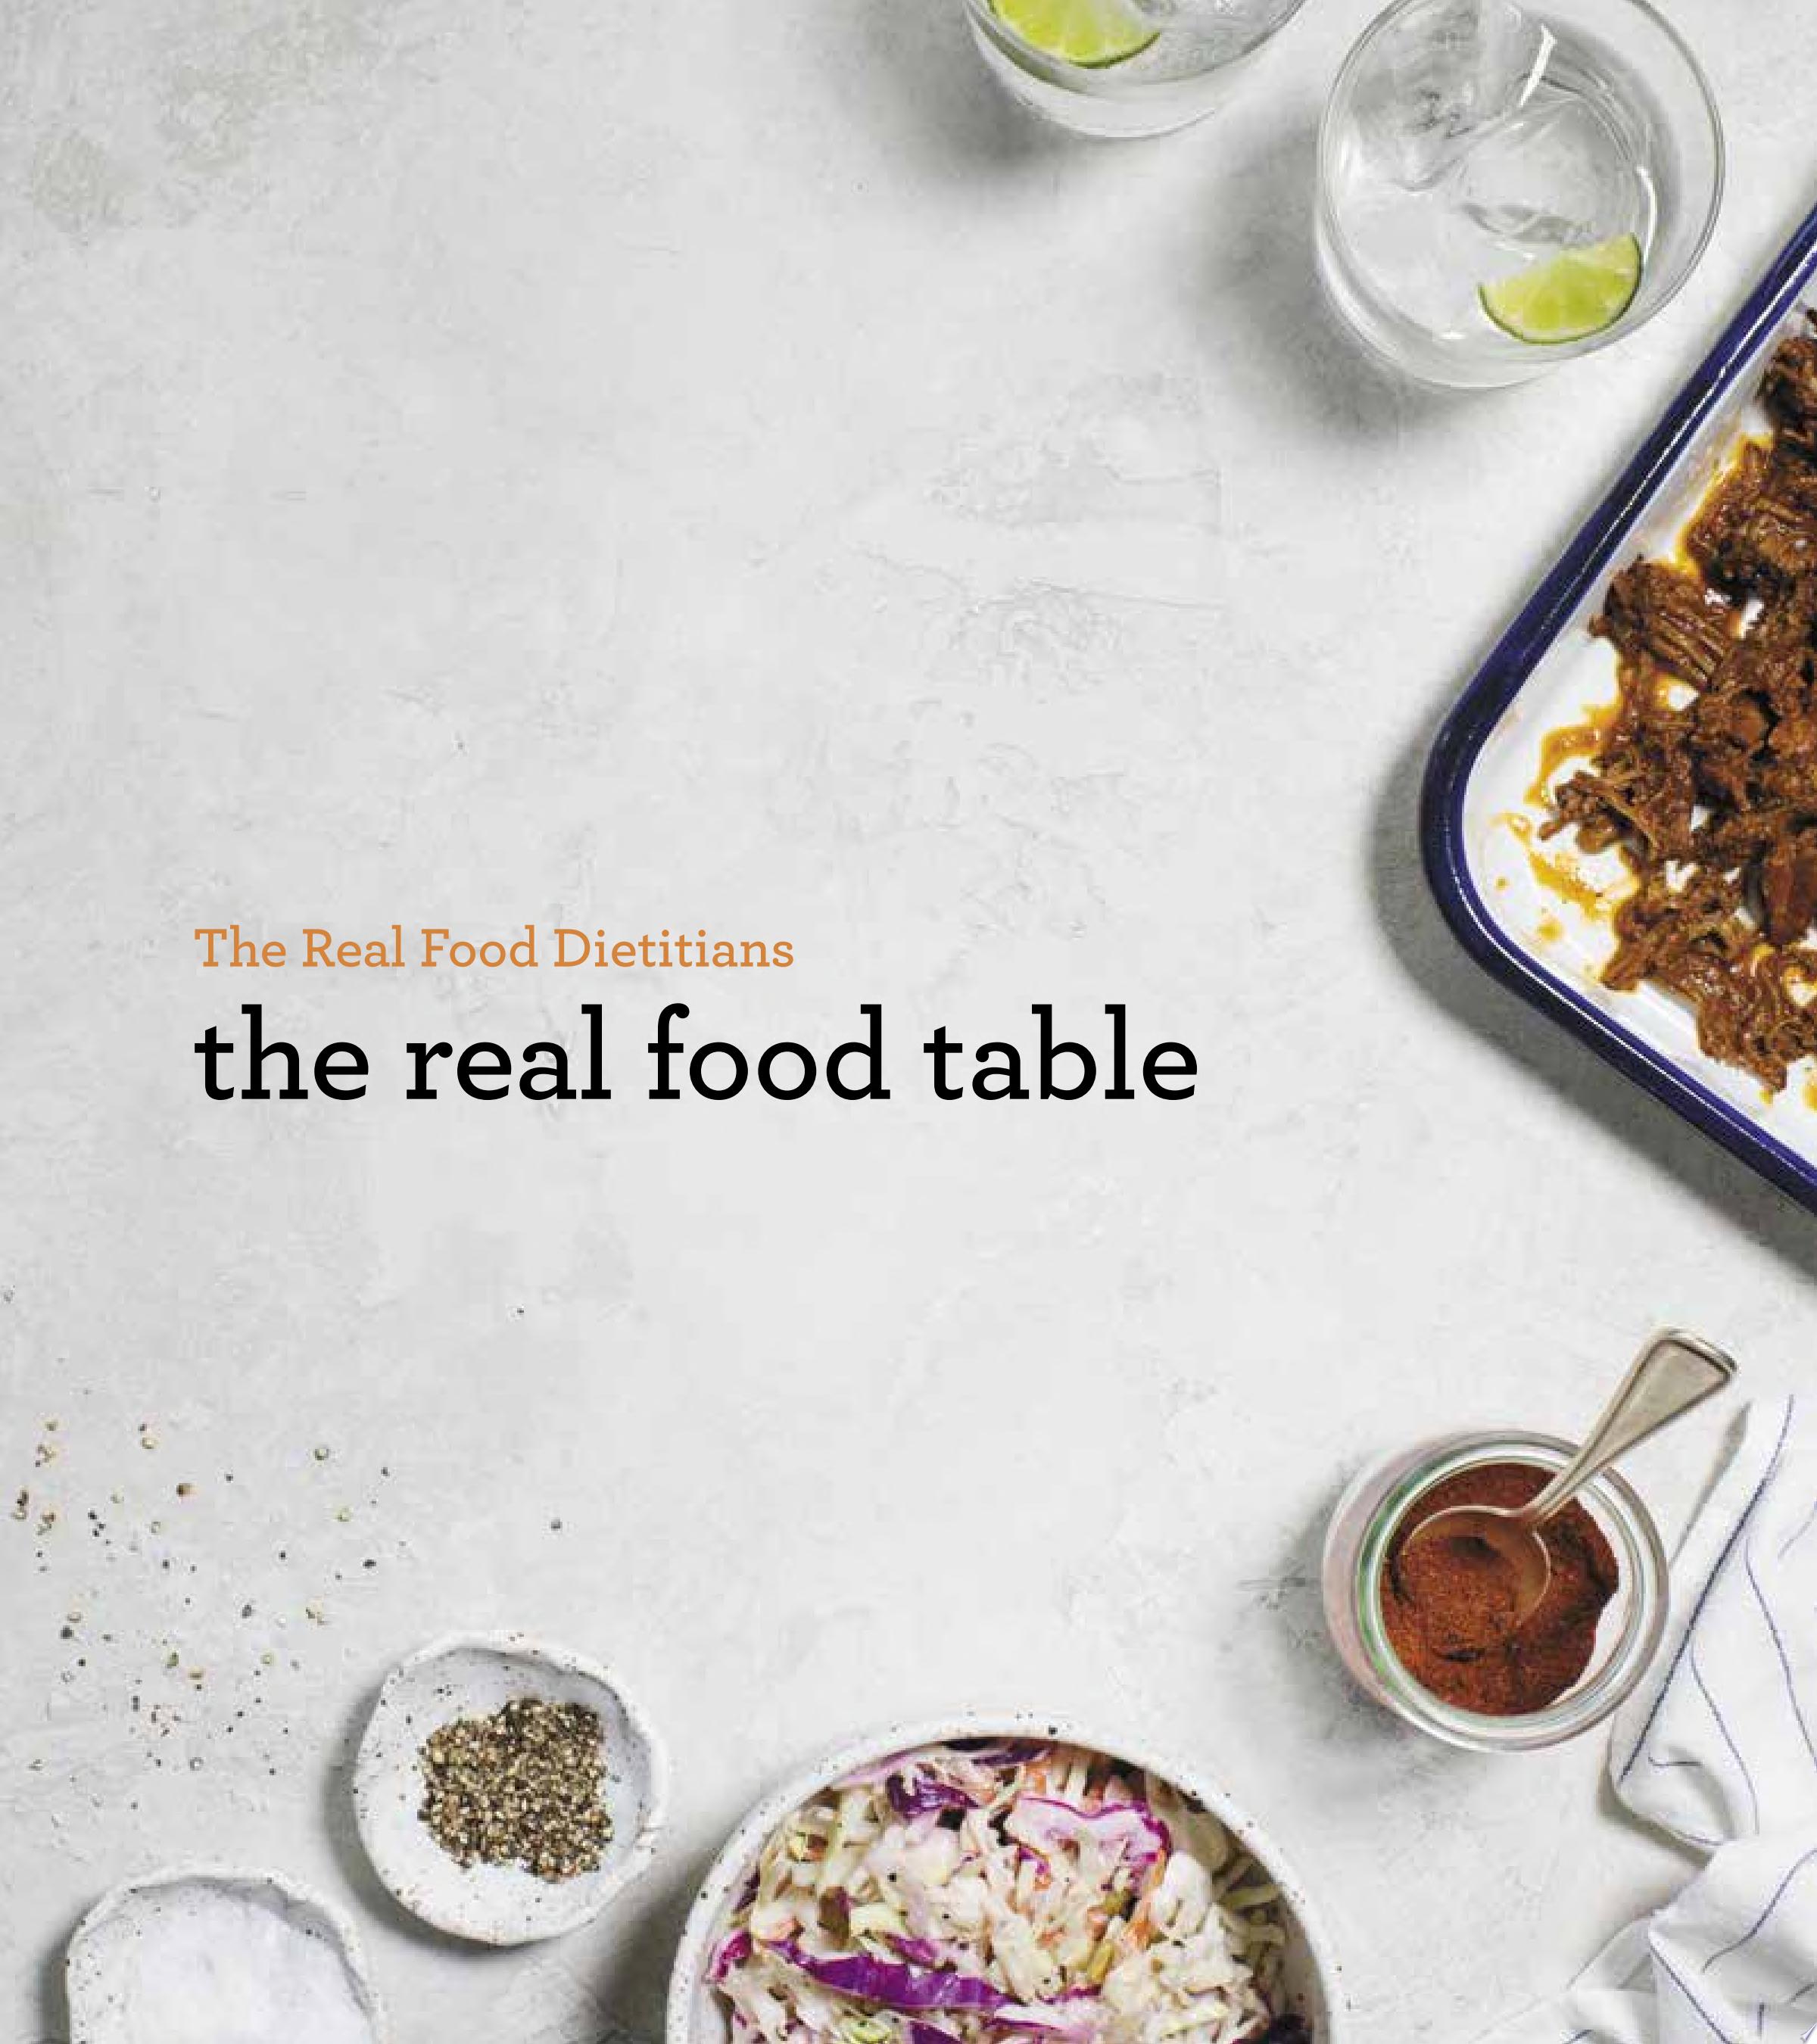 Image for "The Real Food Dietitians: The Real Food Table"